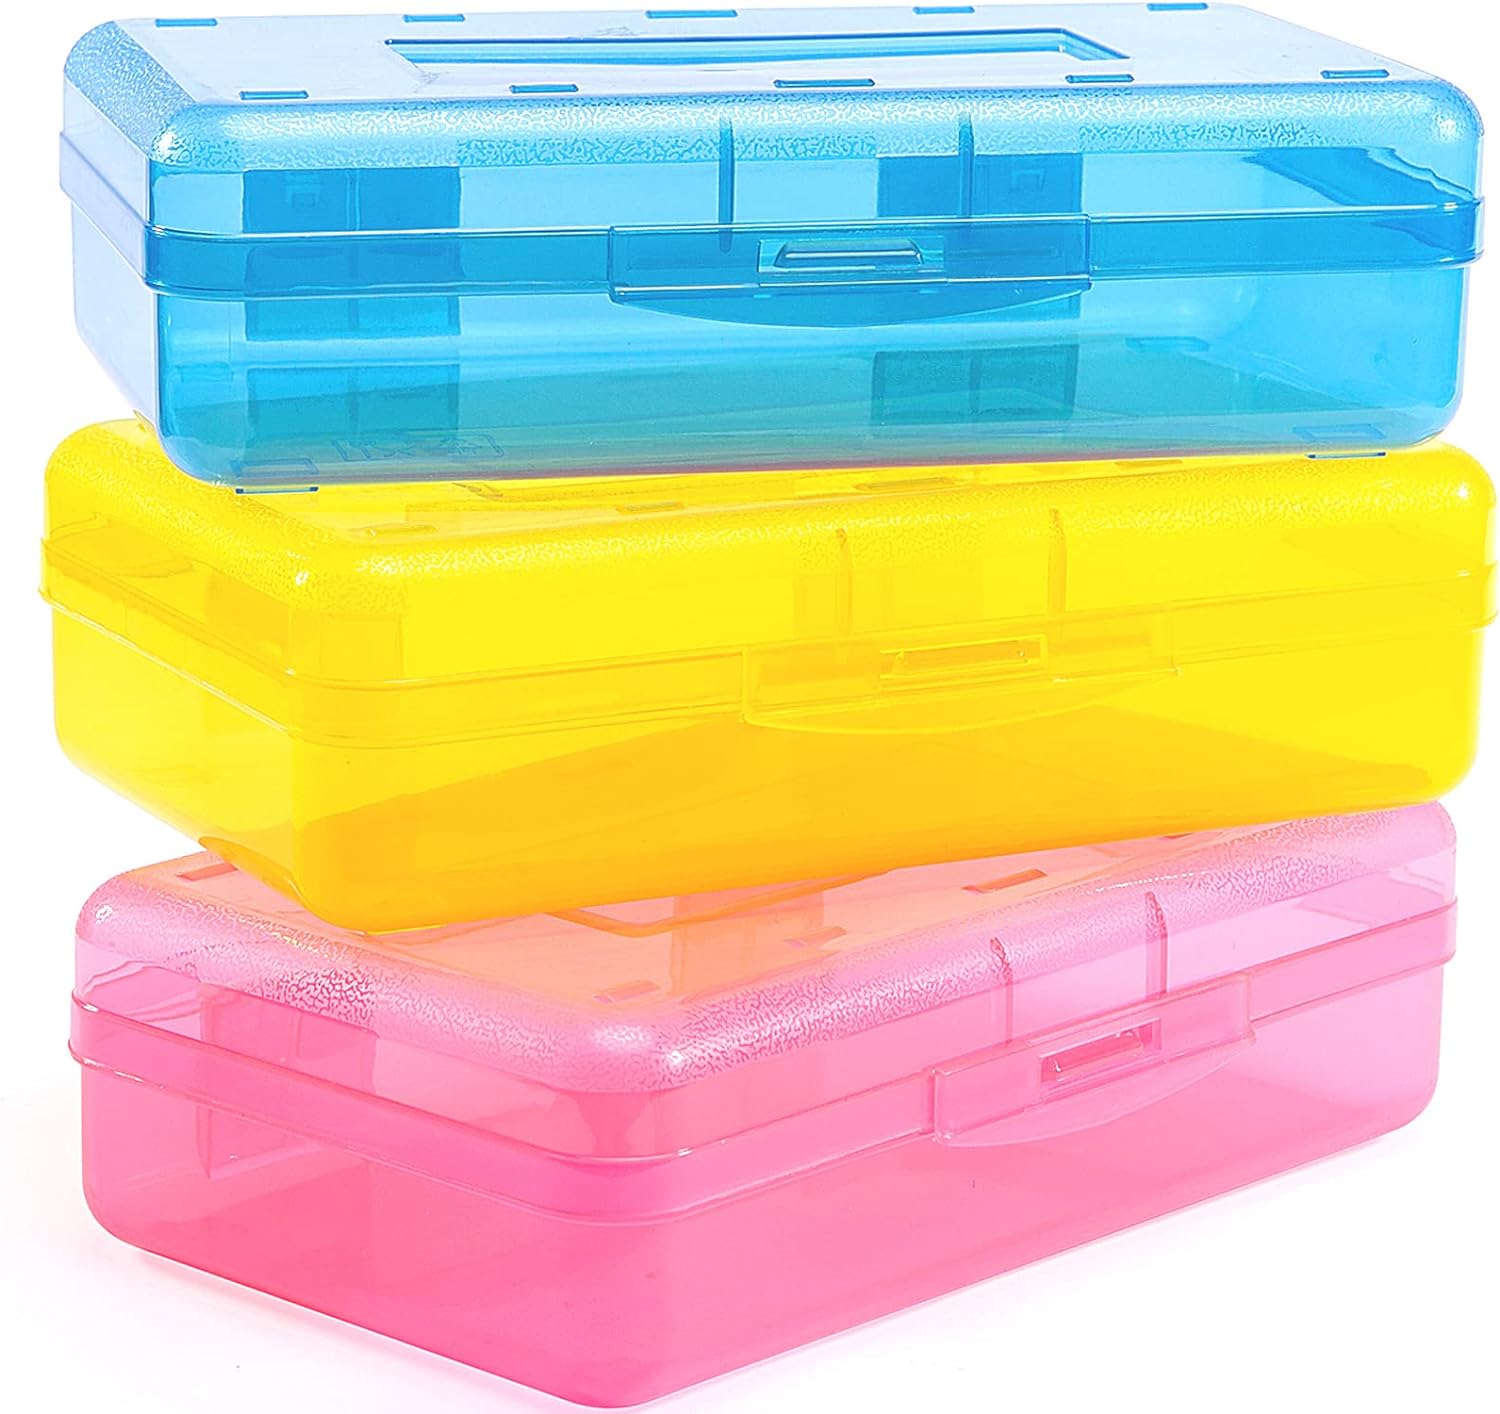 Sooez 3 Pack Large Capacity Hard Pencil Case, Plastic Crayon Pencil Boxes Bulk with Snap-tight Lid, Clear Storage Box Craft Pen Art Marker Organizer Stackable for Kids Boys School